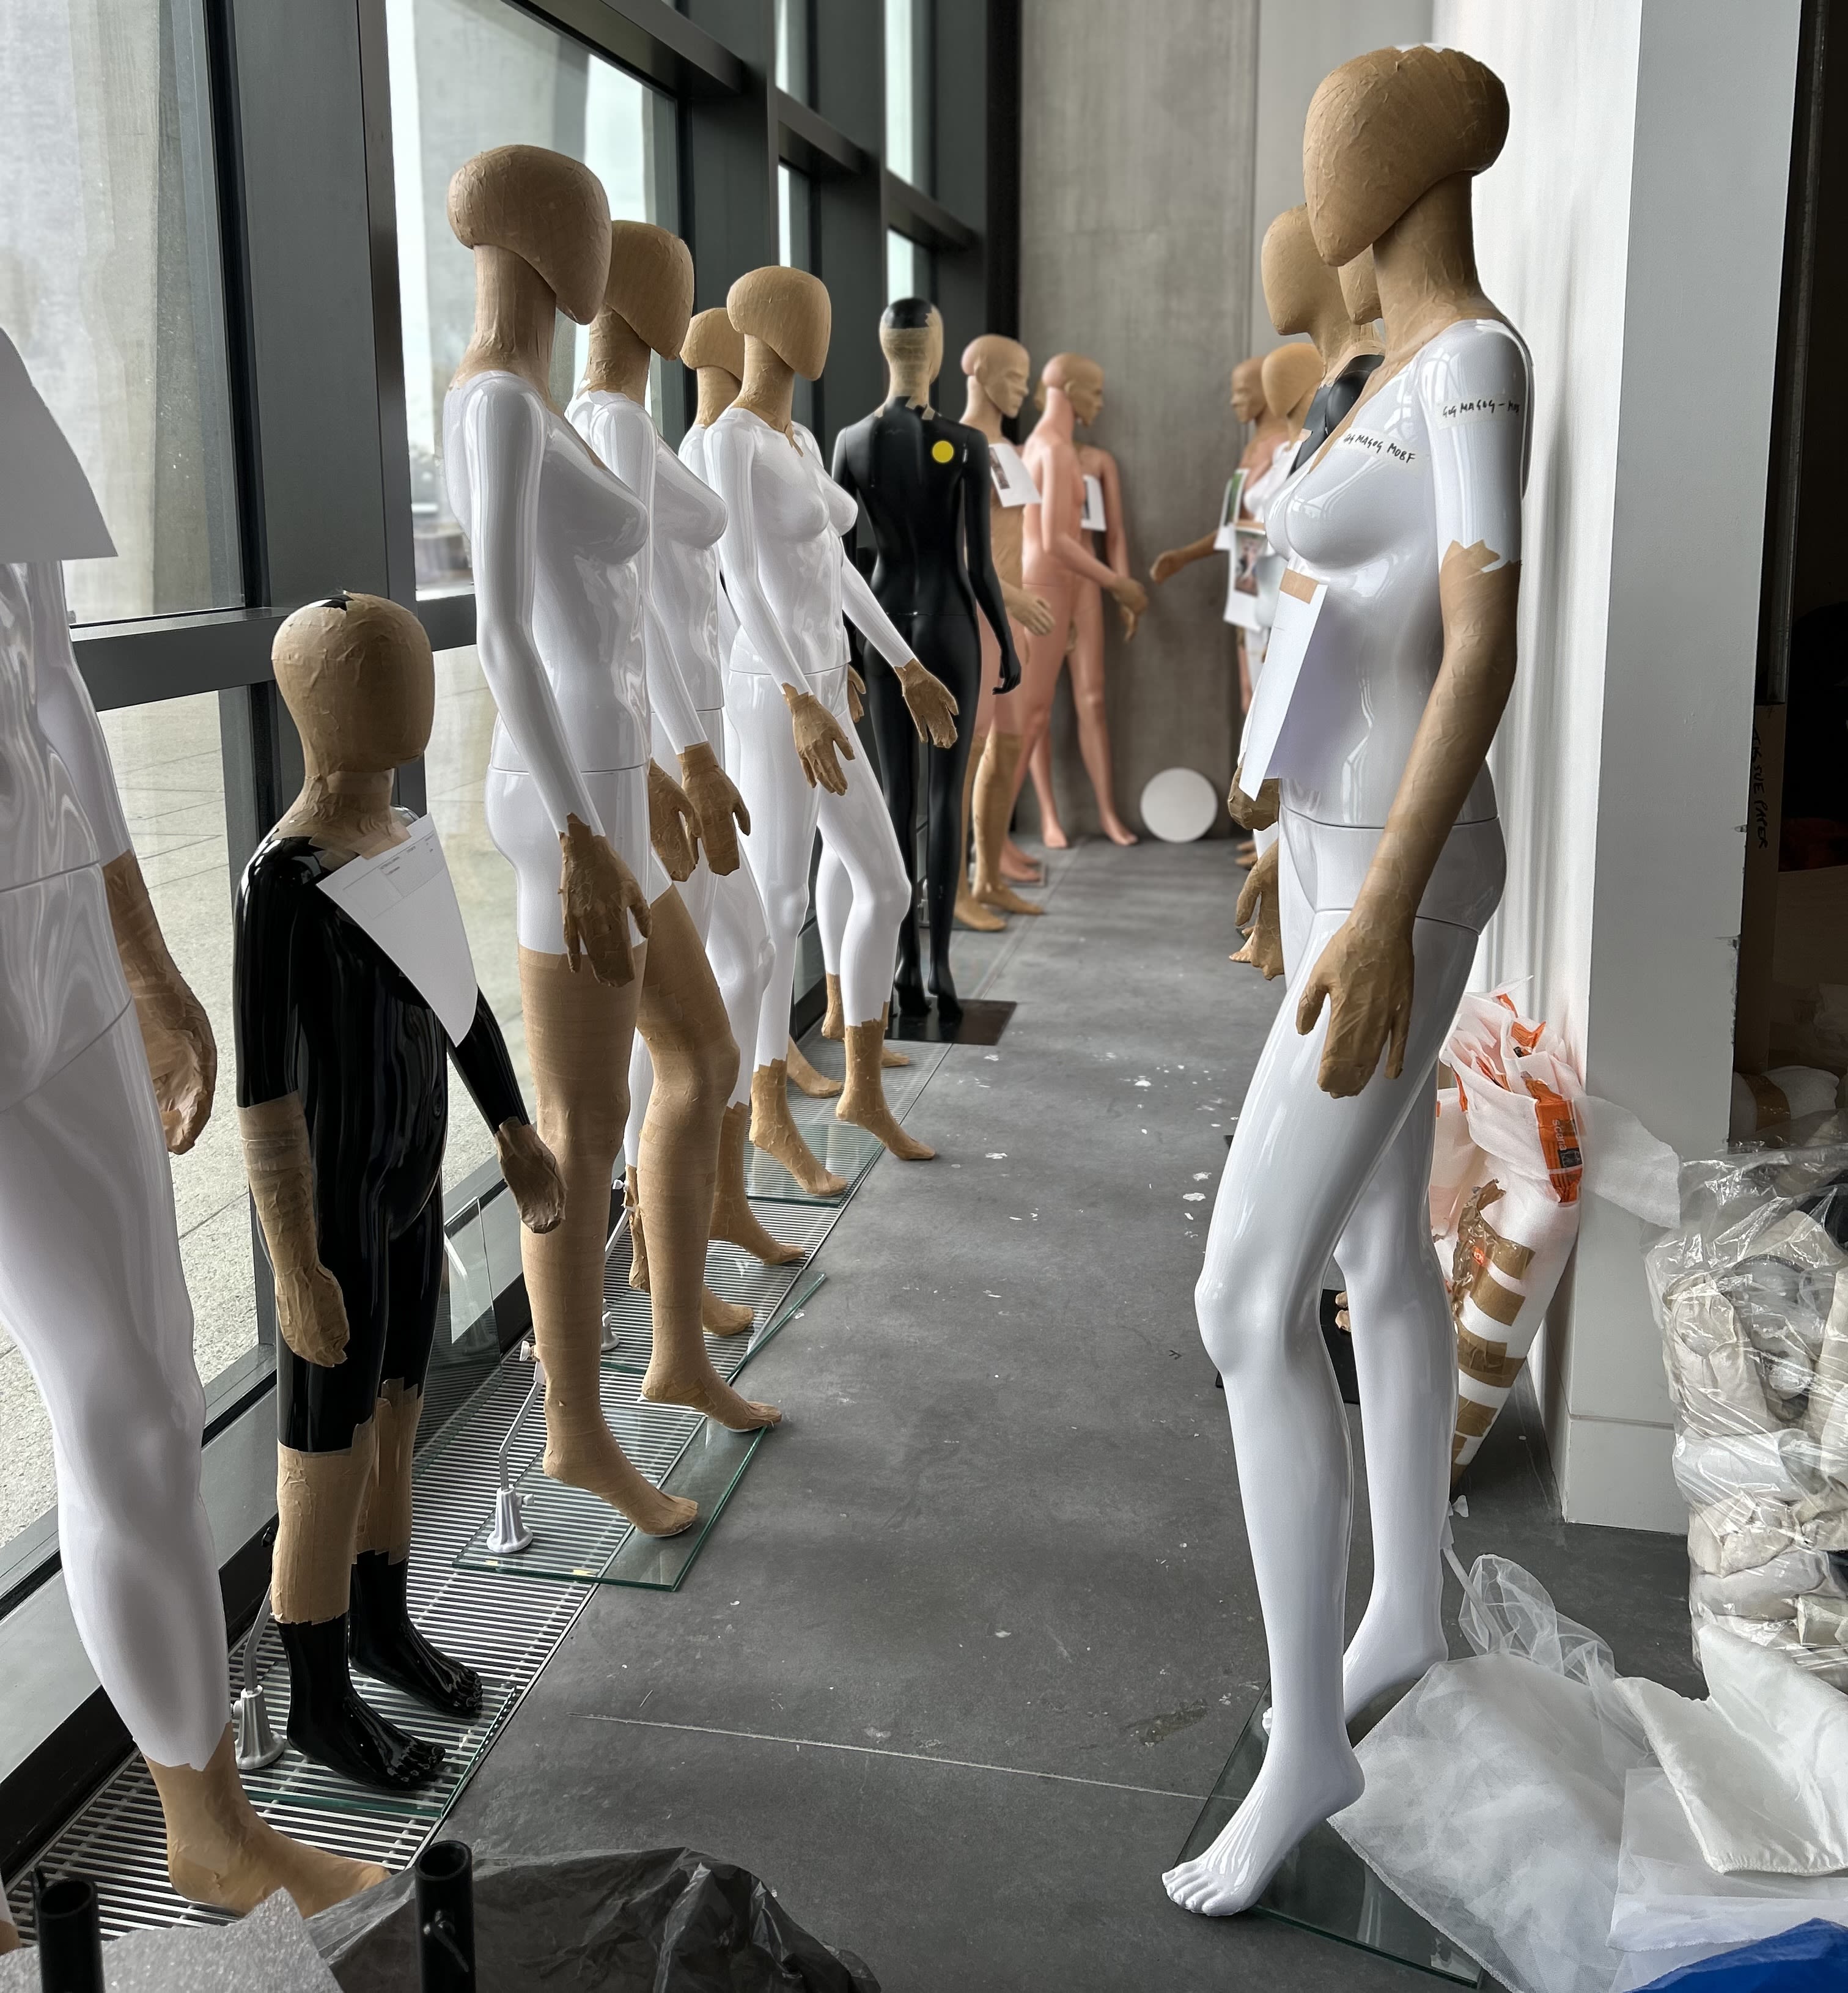 undressed mannequins in a row